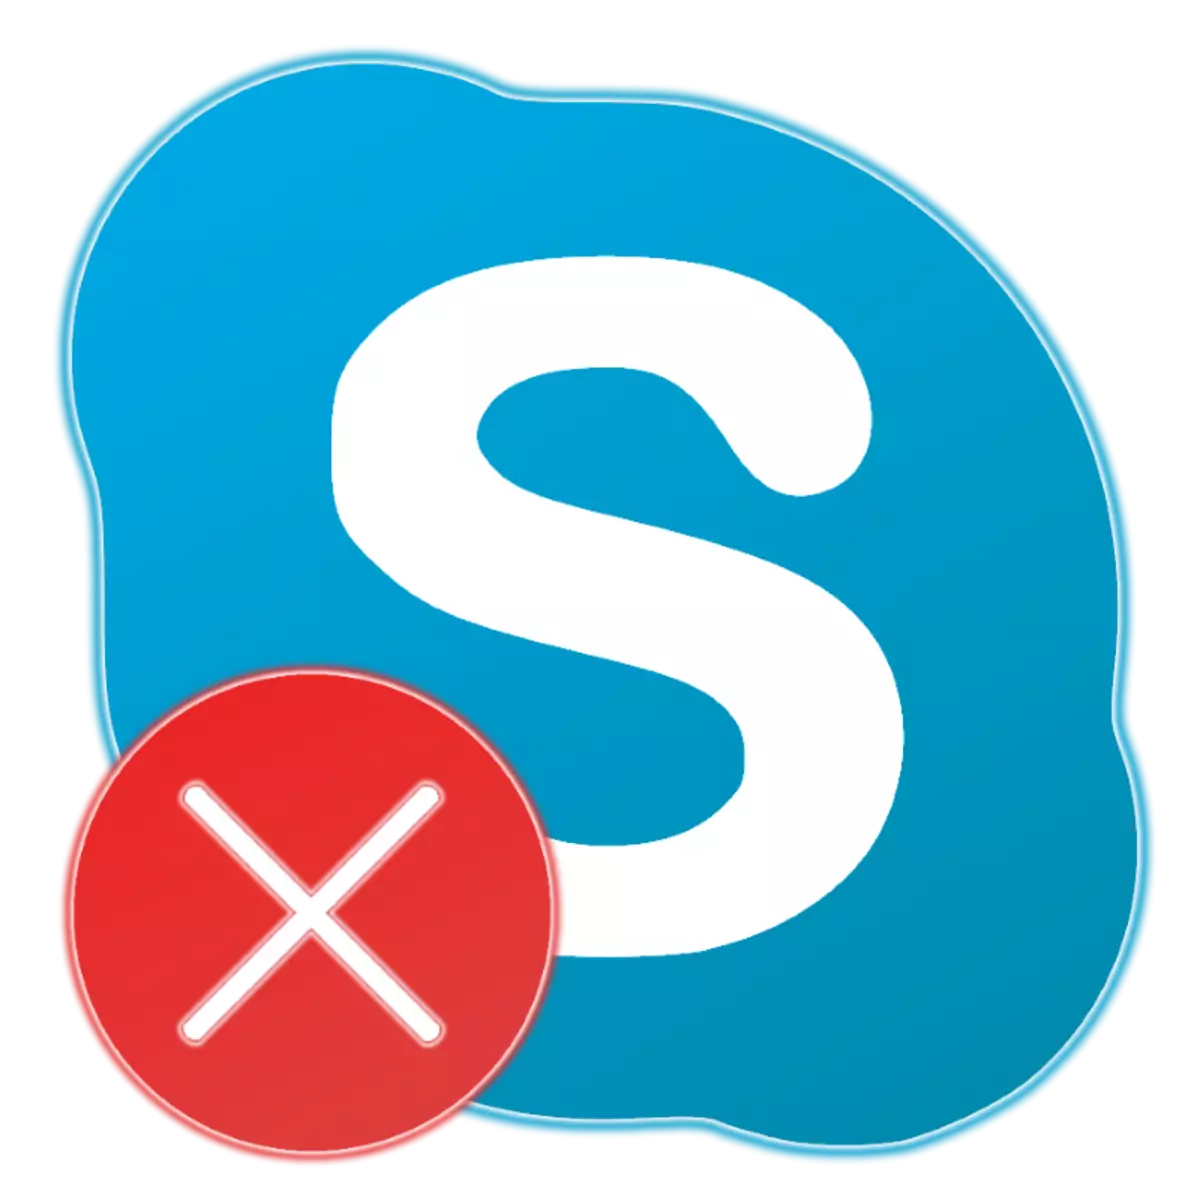 Why Skype does not work